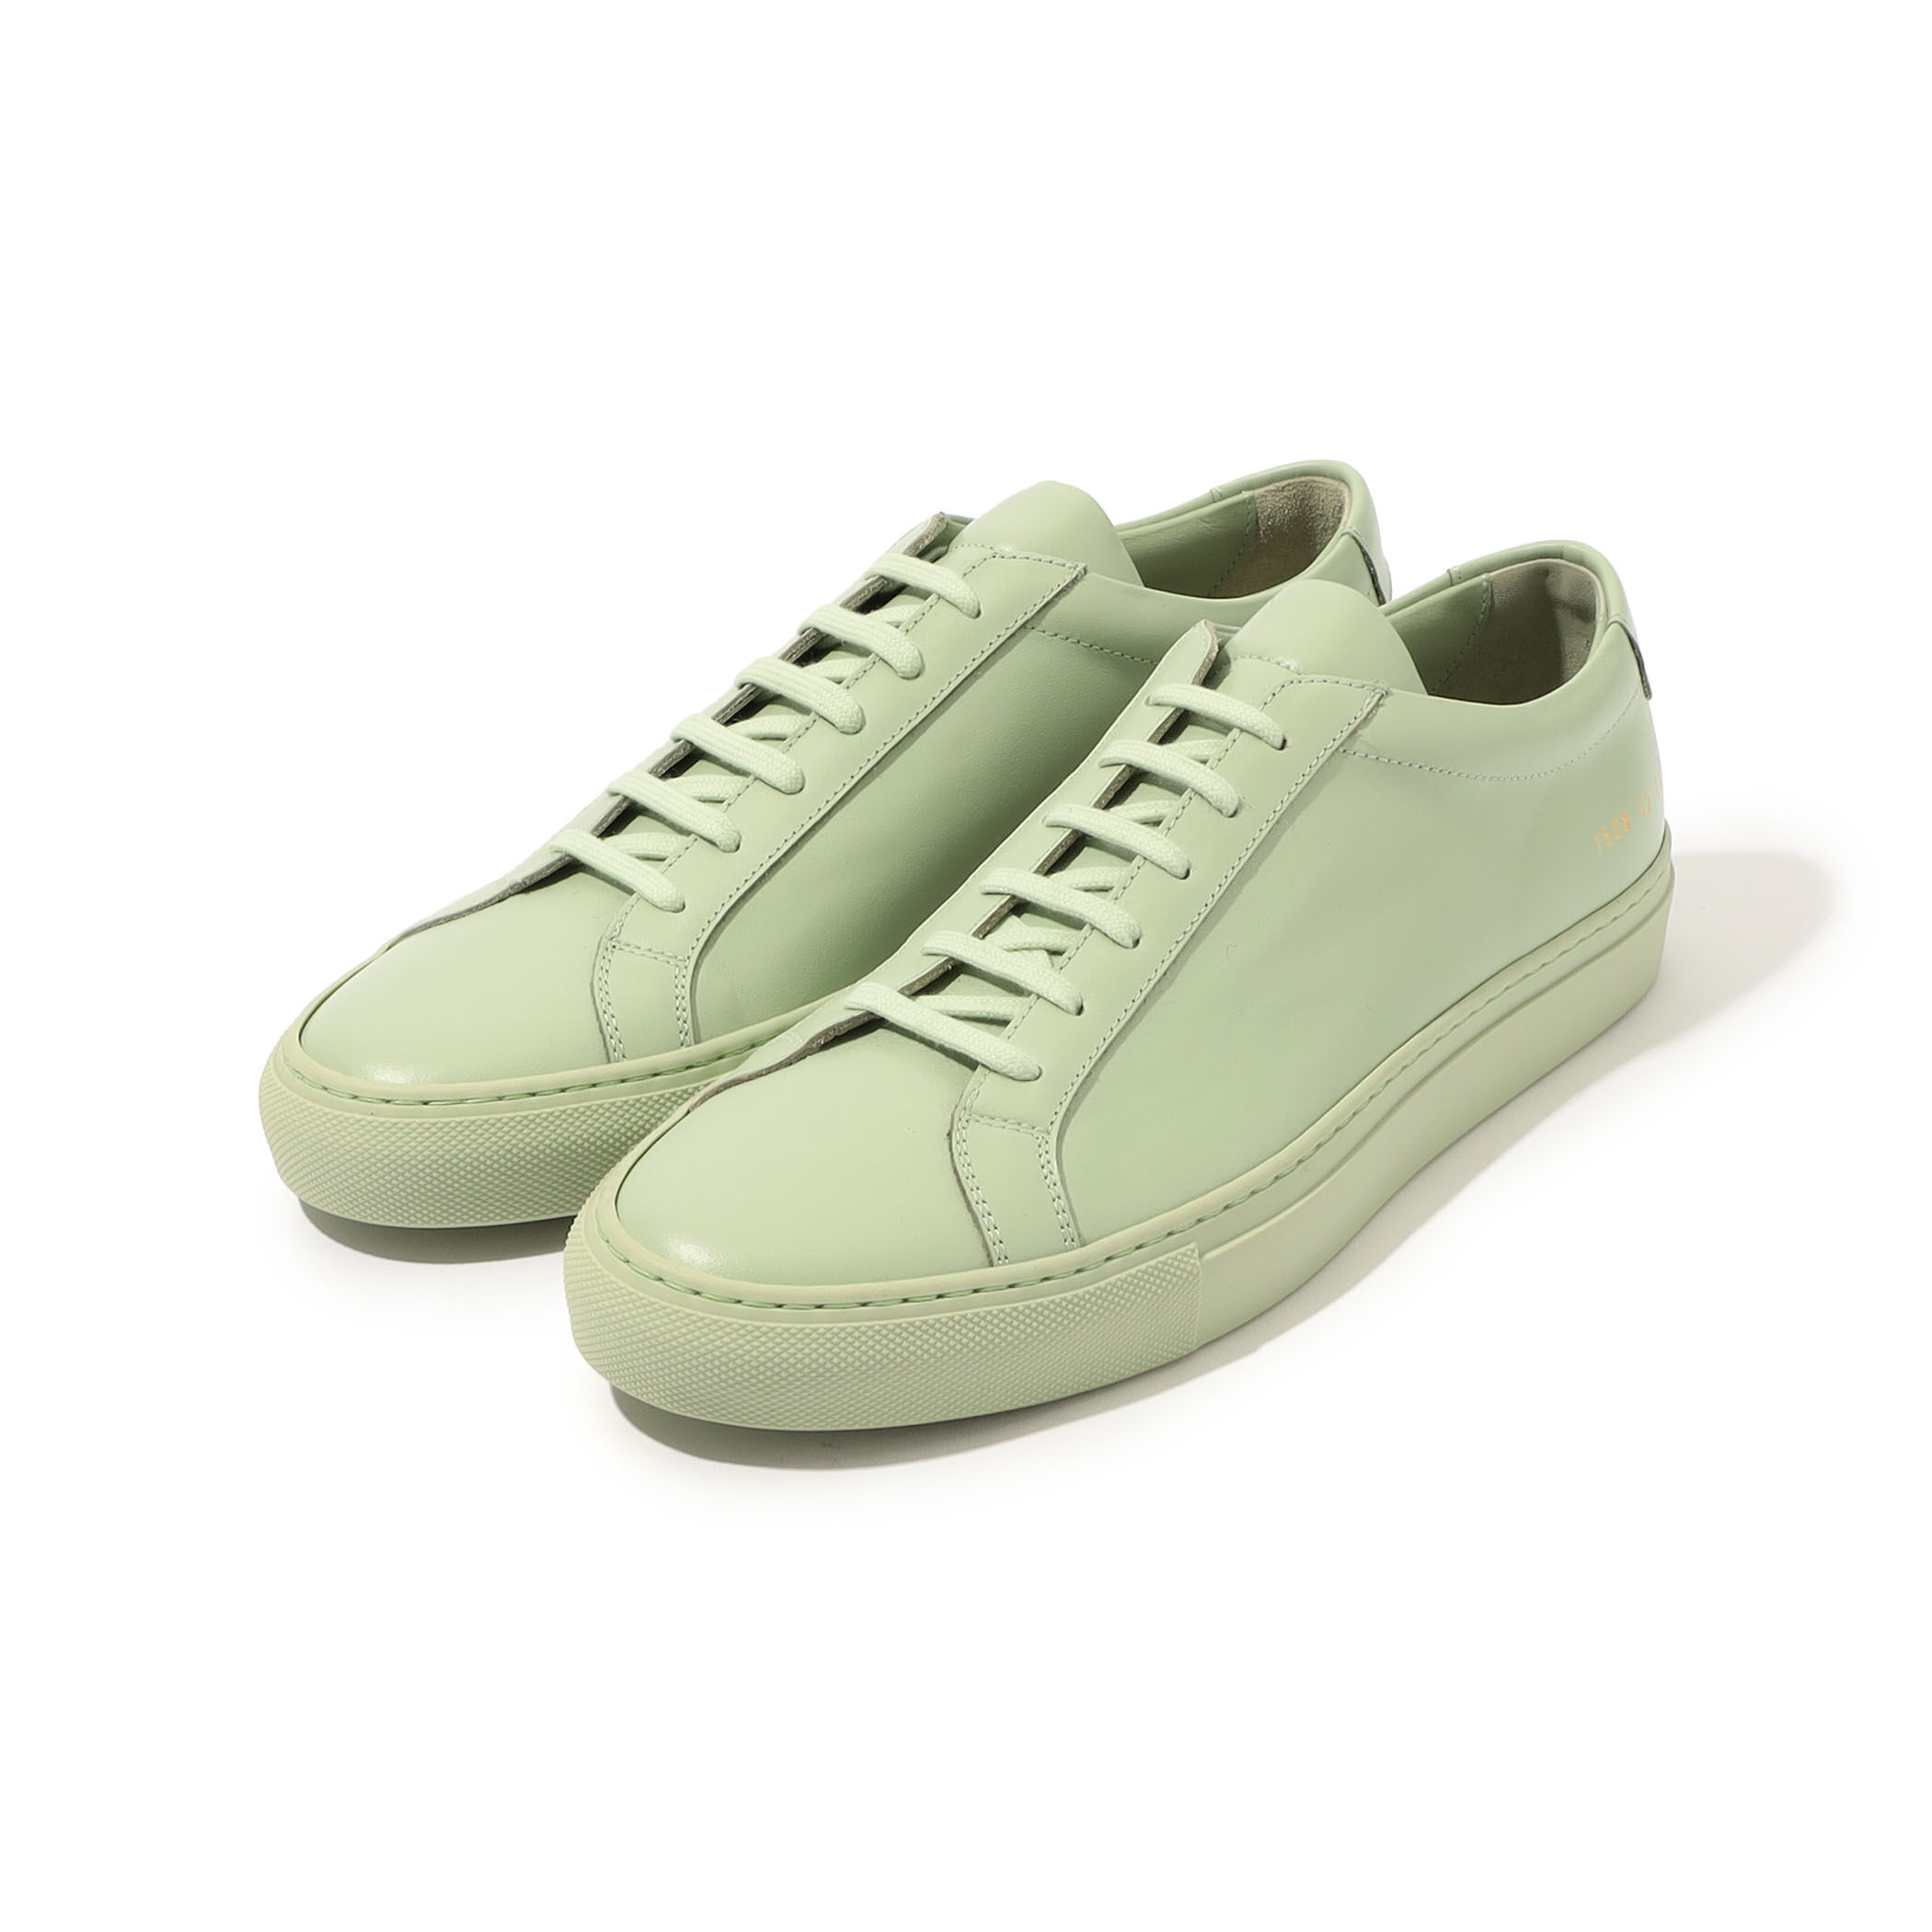 COMMON PROJECTS Achilles Low スニーカー箱と替えの靴紐もあります